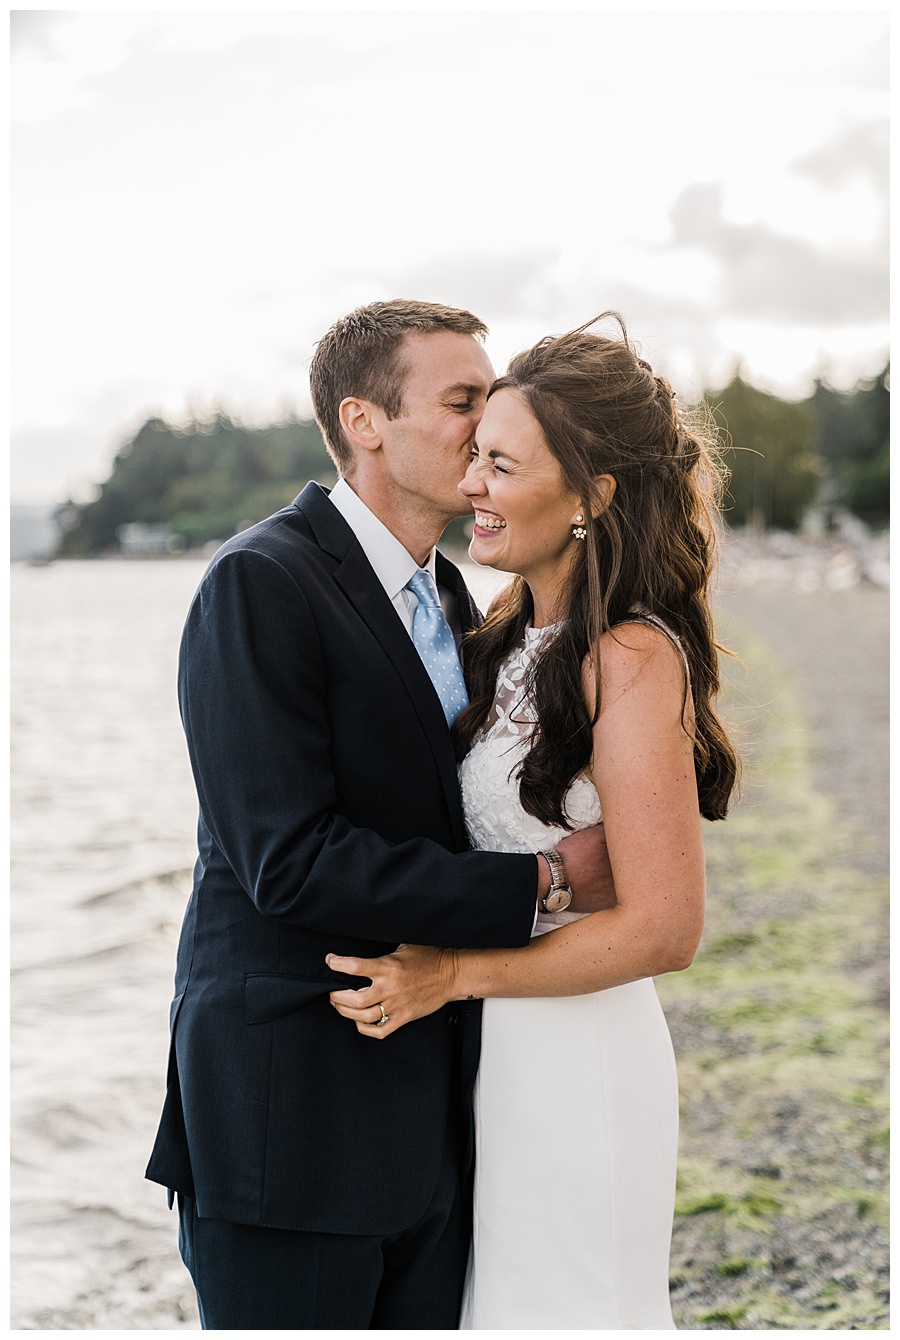 A groom kisses his bride during their Camano Island elopement photographed by Amy Galbraith